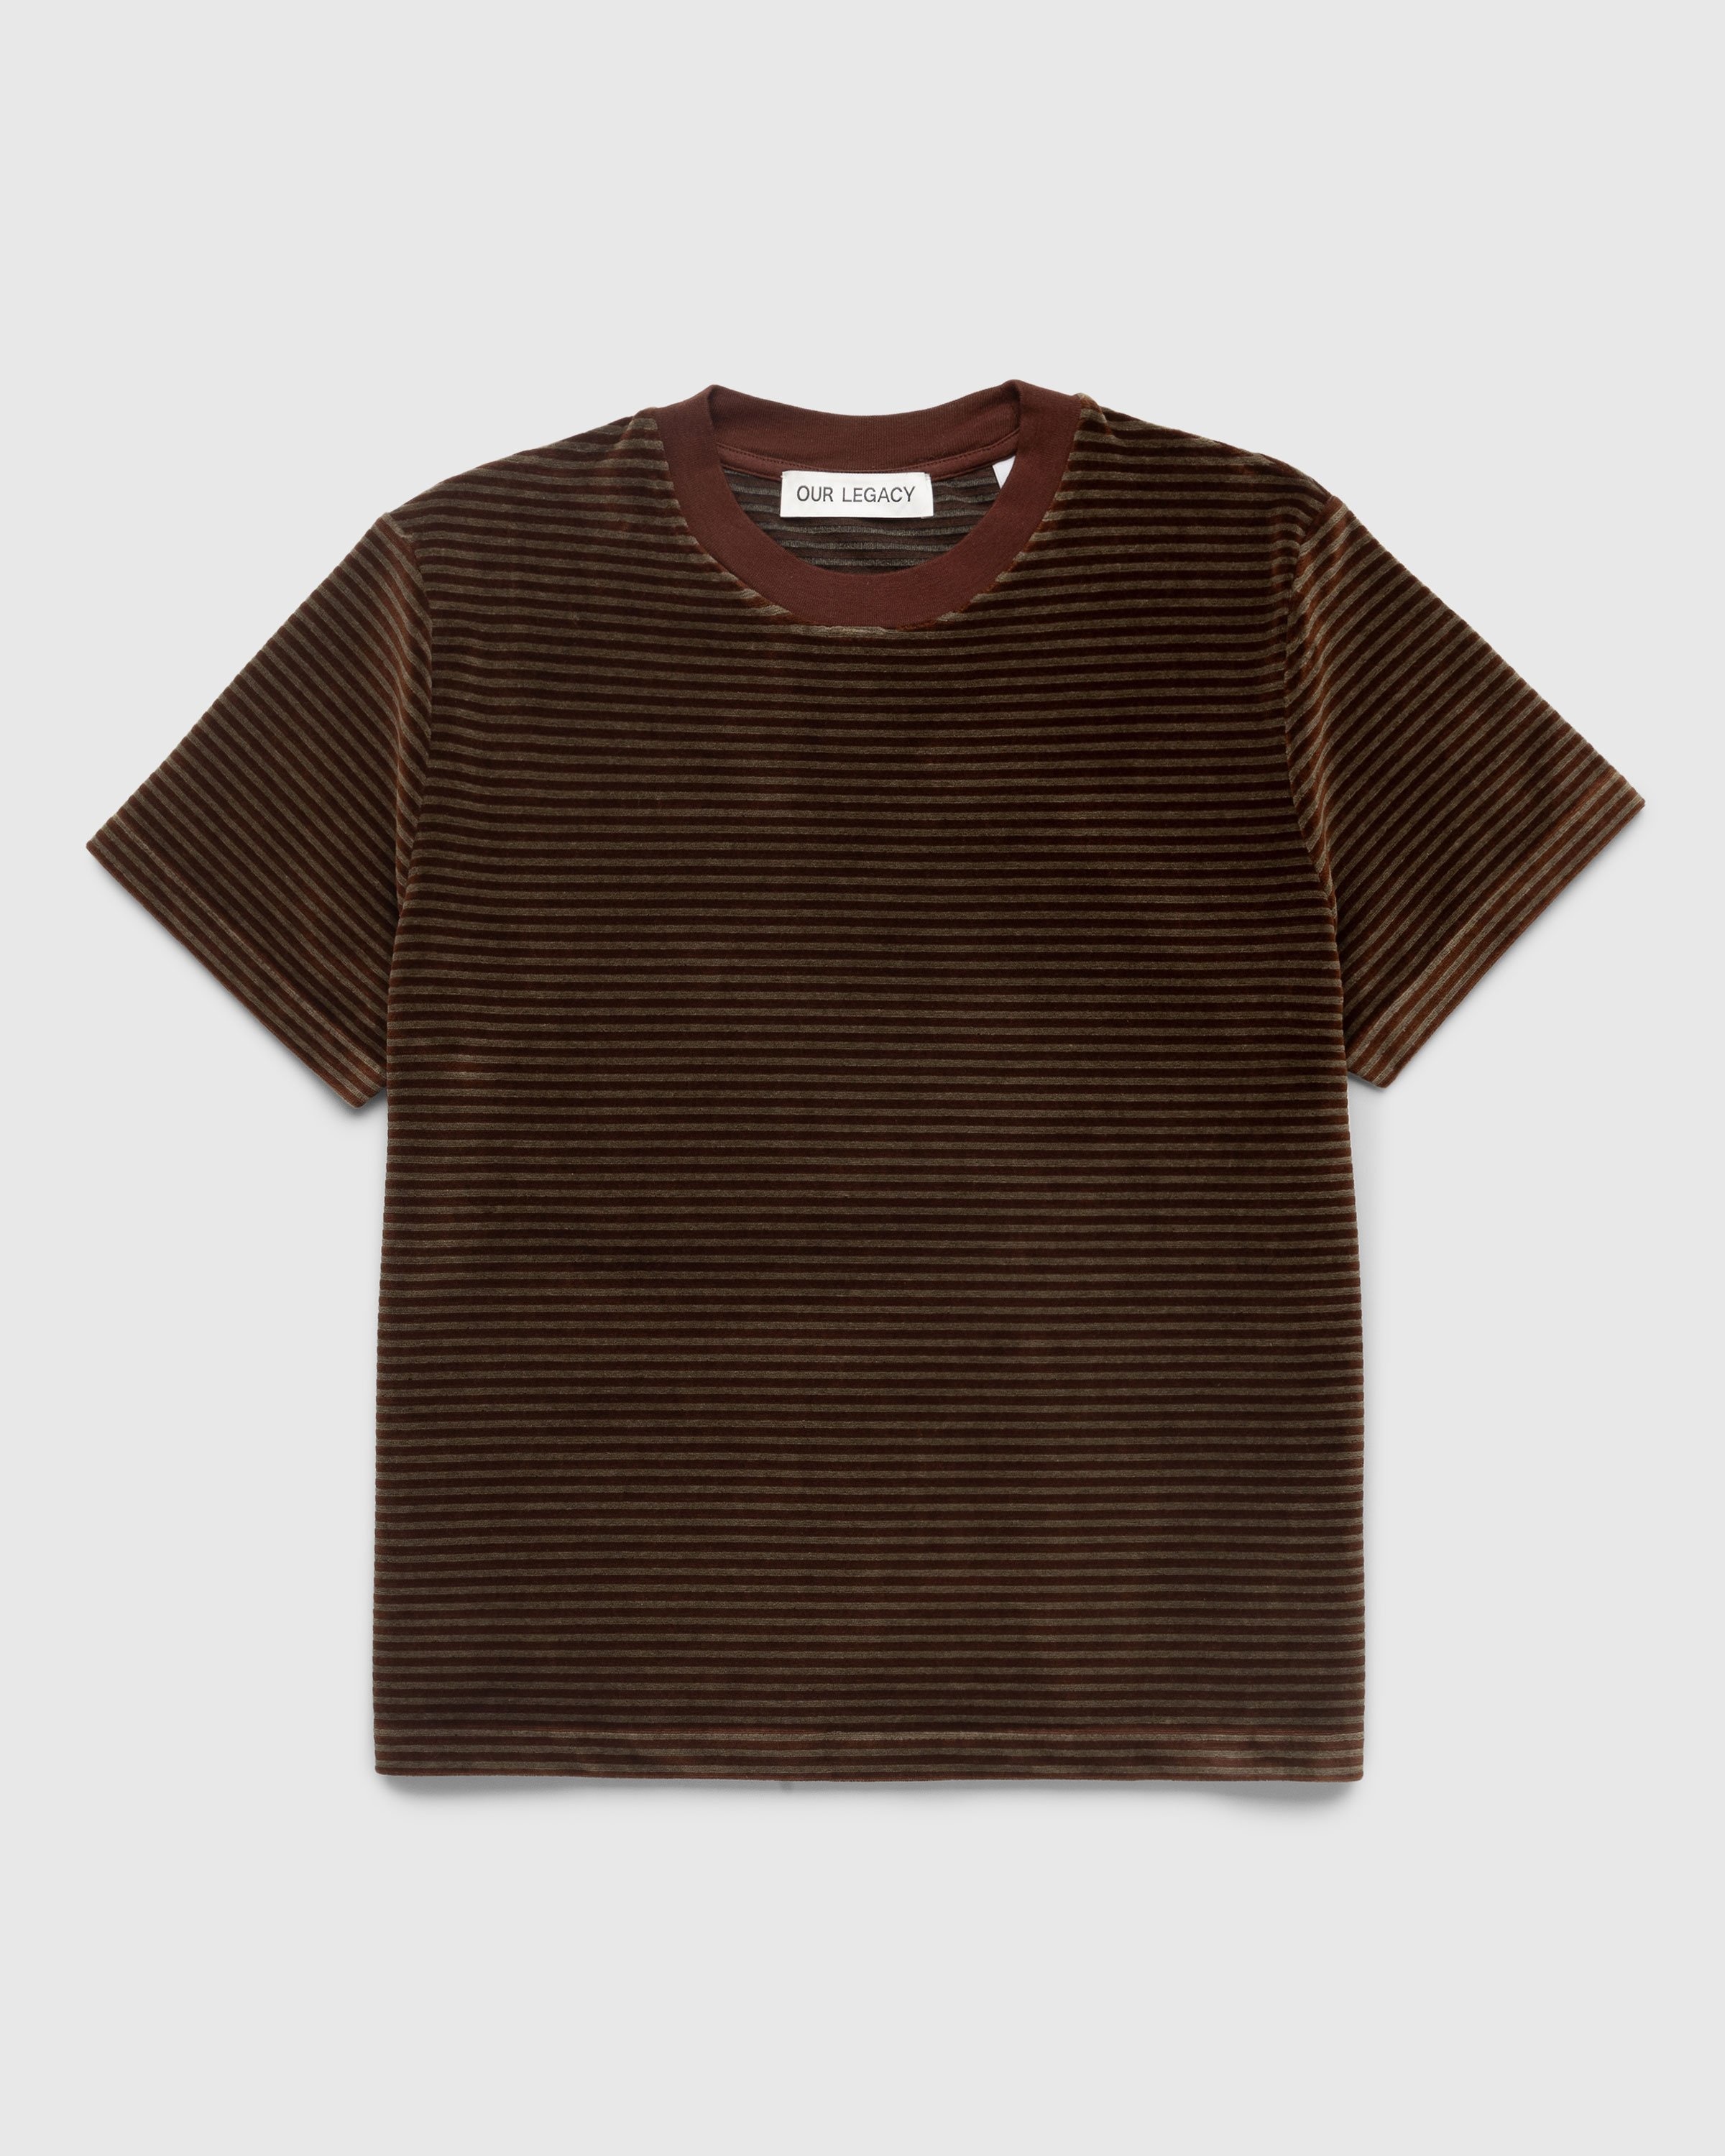 Our Legacy – Hover T-Shirt Brown - T-shirts - Brown - Image 1